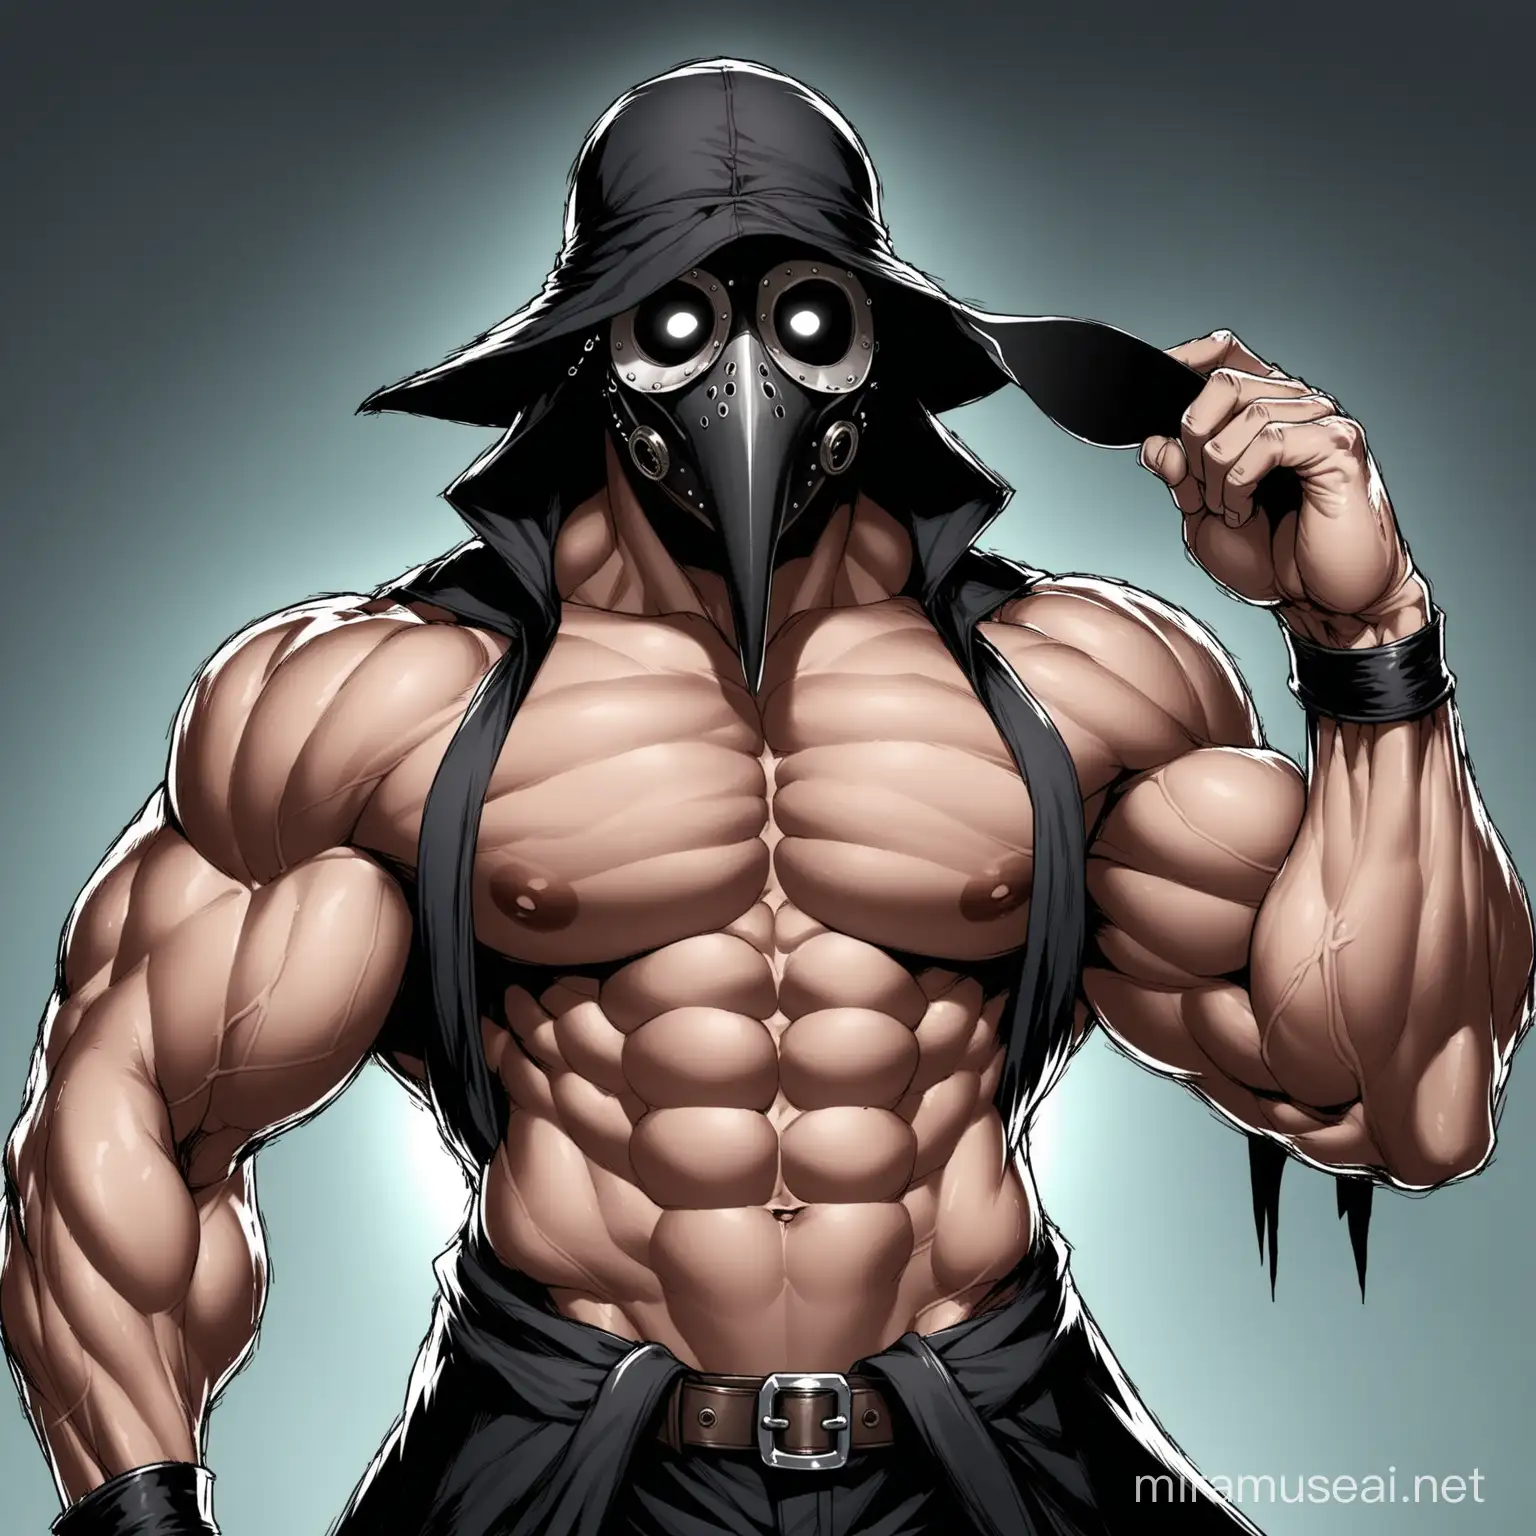 A jacked built wizard with a plague doctor mask, as he doesn't wear his robes, showing off his upper body, half naked, super jacked, dumb-looking, 